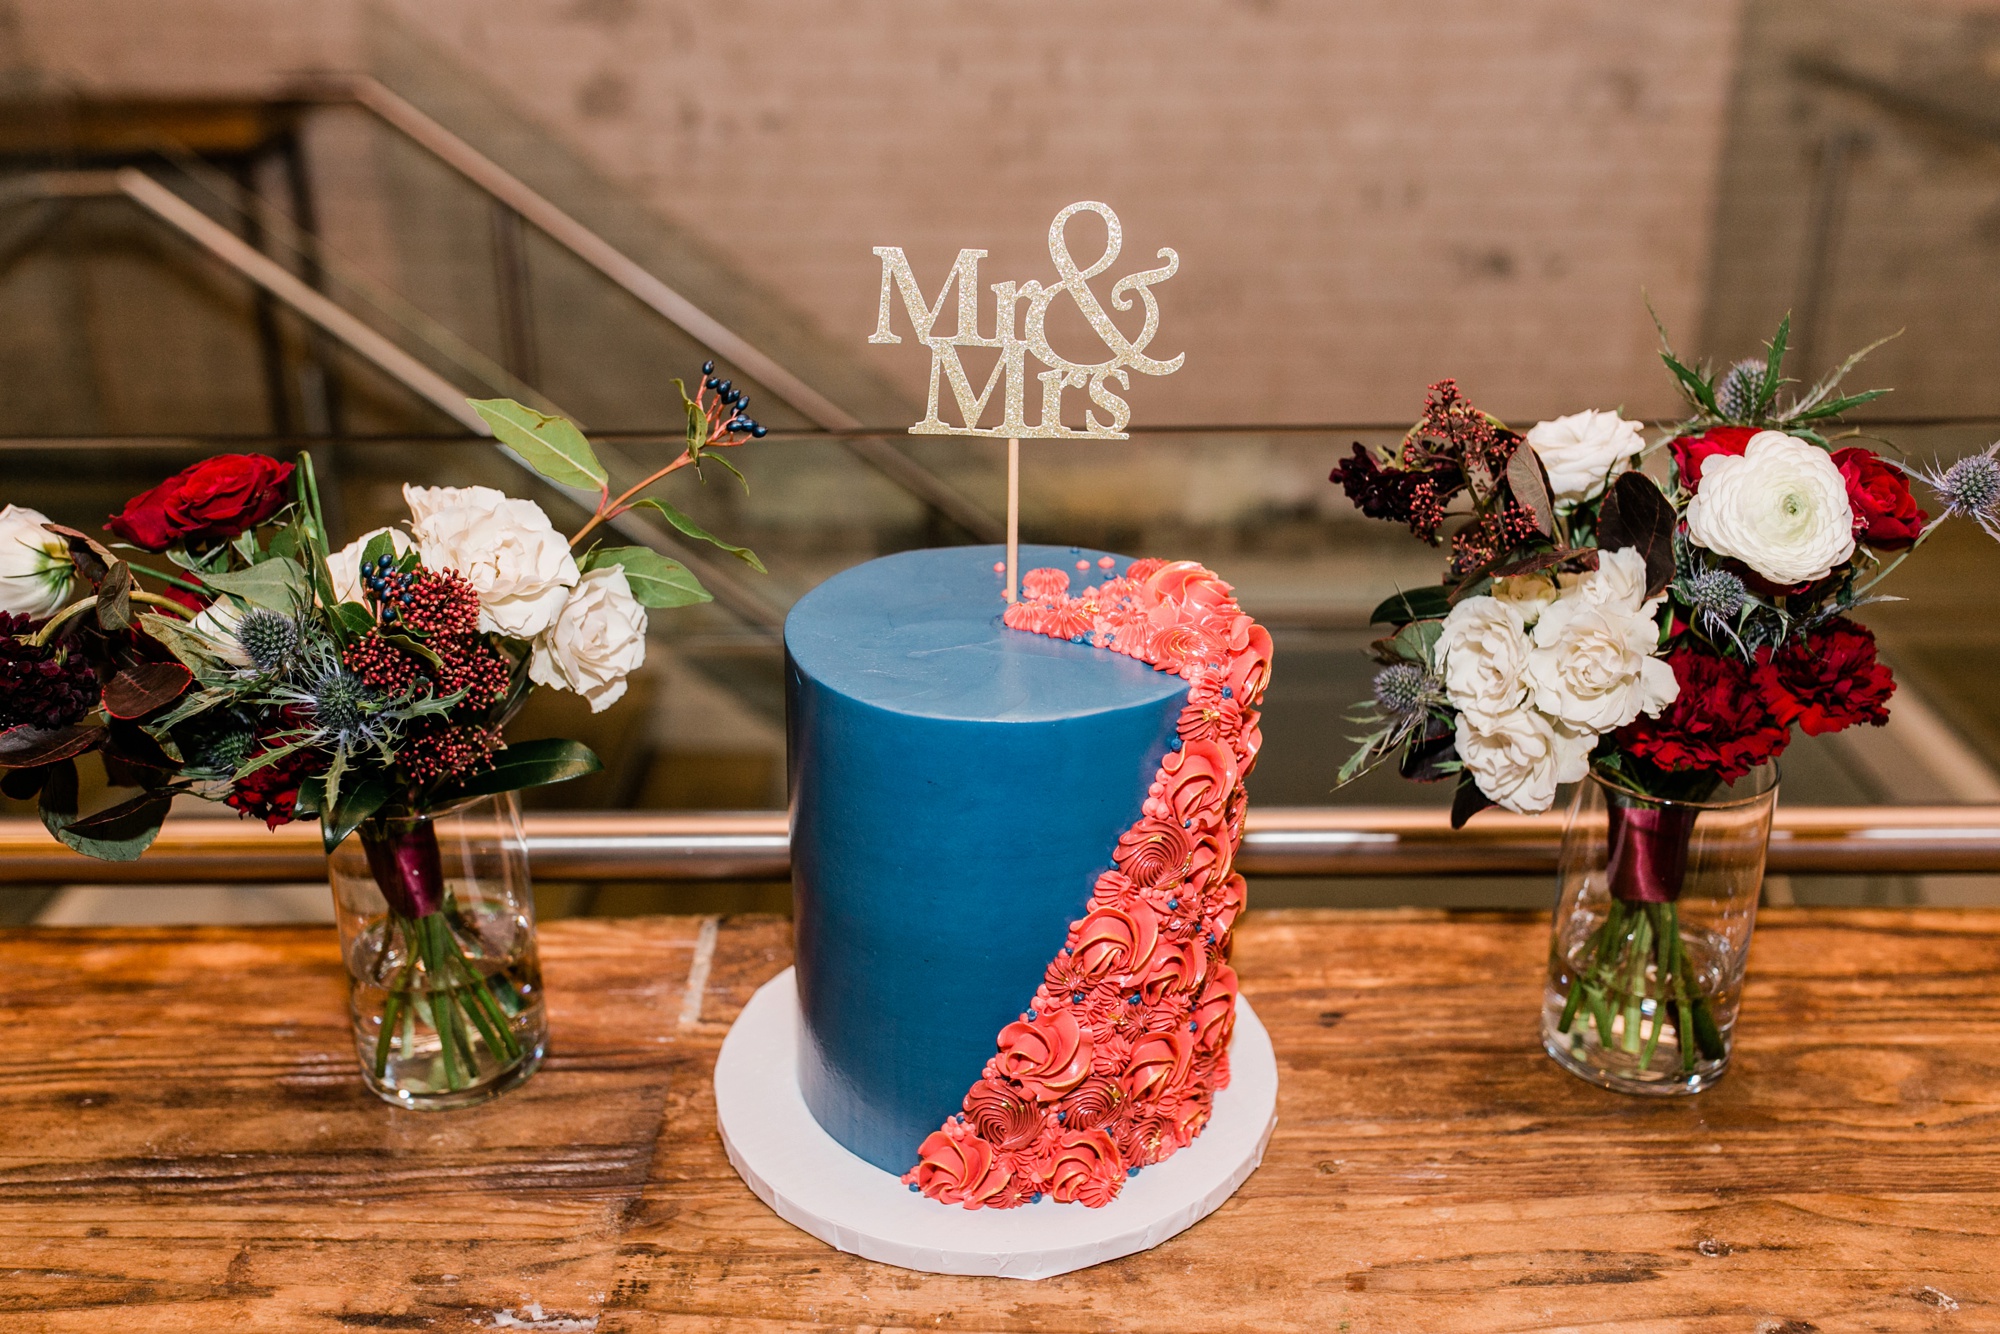 wedding cake with "Mr" and "Mrs" topper